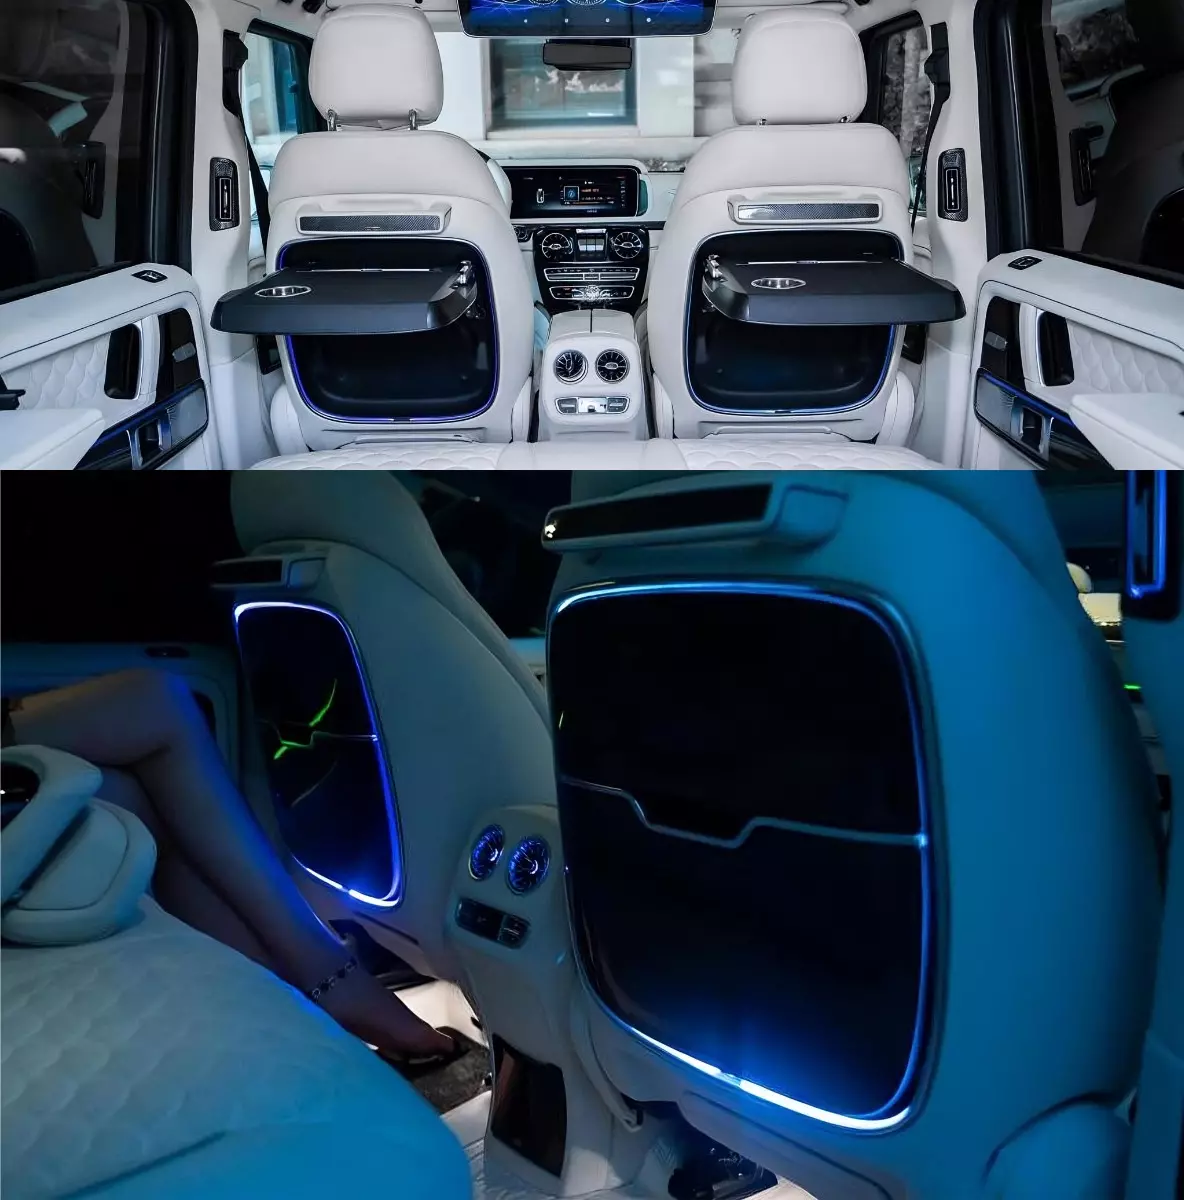 2 pcs Set of LED Illuminated Back Seat Foldable Tables with Cup Holders for Mercedes-Benz G-Class W463A